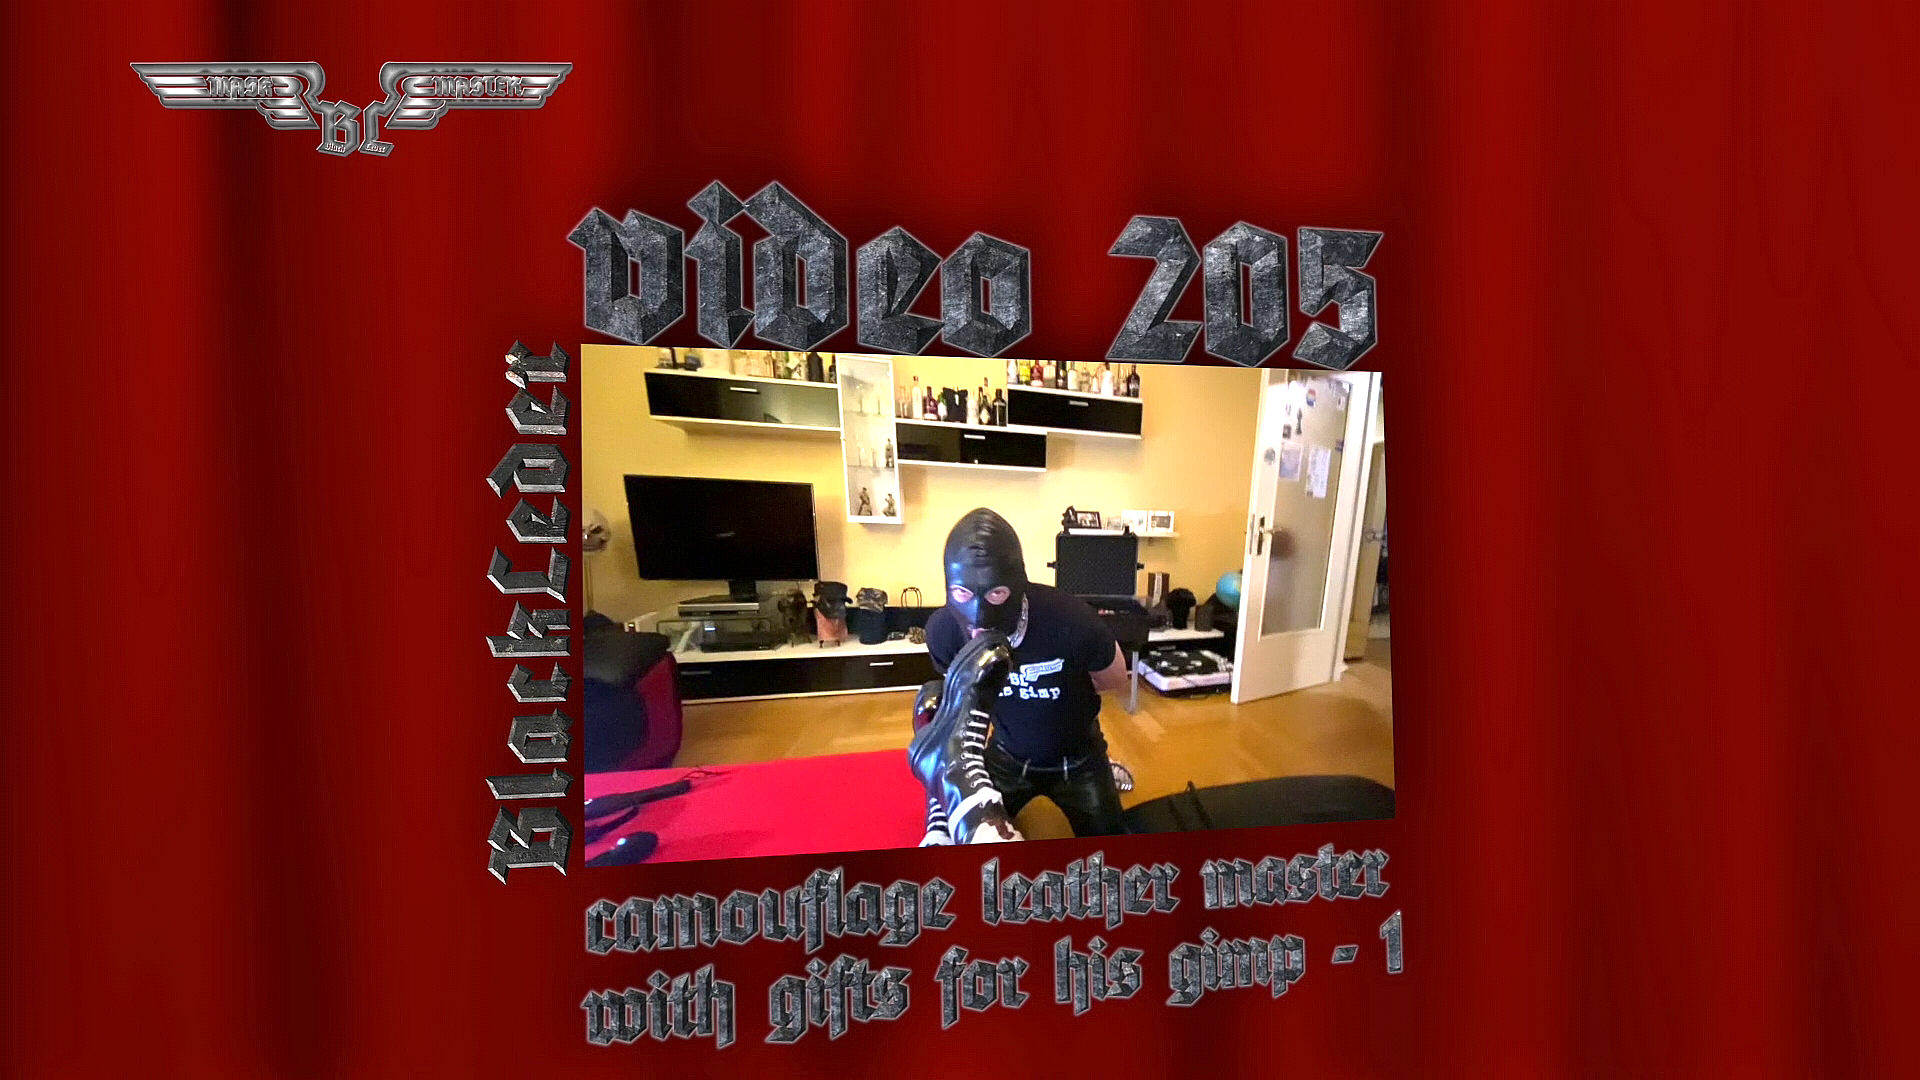 205 CAMOUFLAGE LEATHER MASTER WITH GIFTS FOR HIS GIMP 1